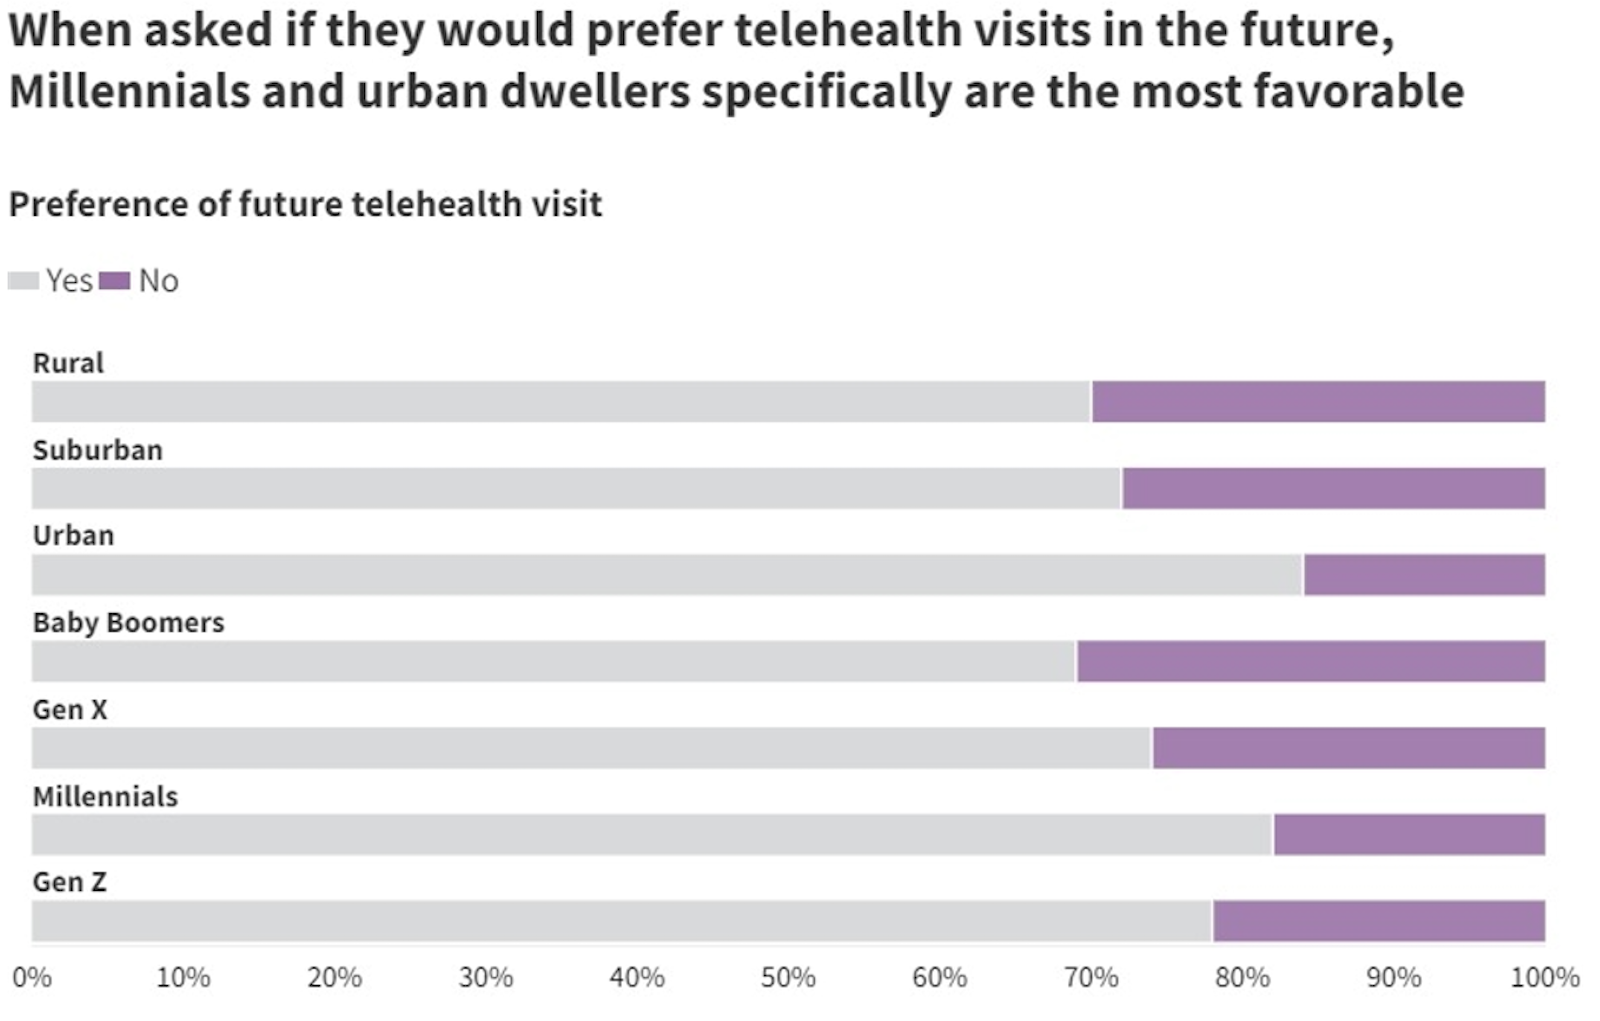 Preference of future telehealth visit